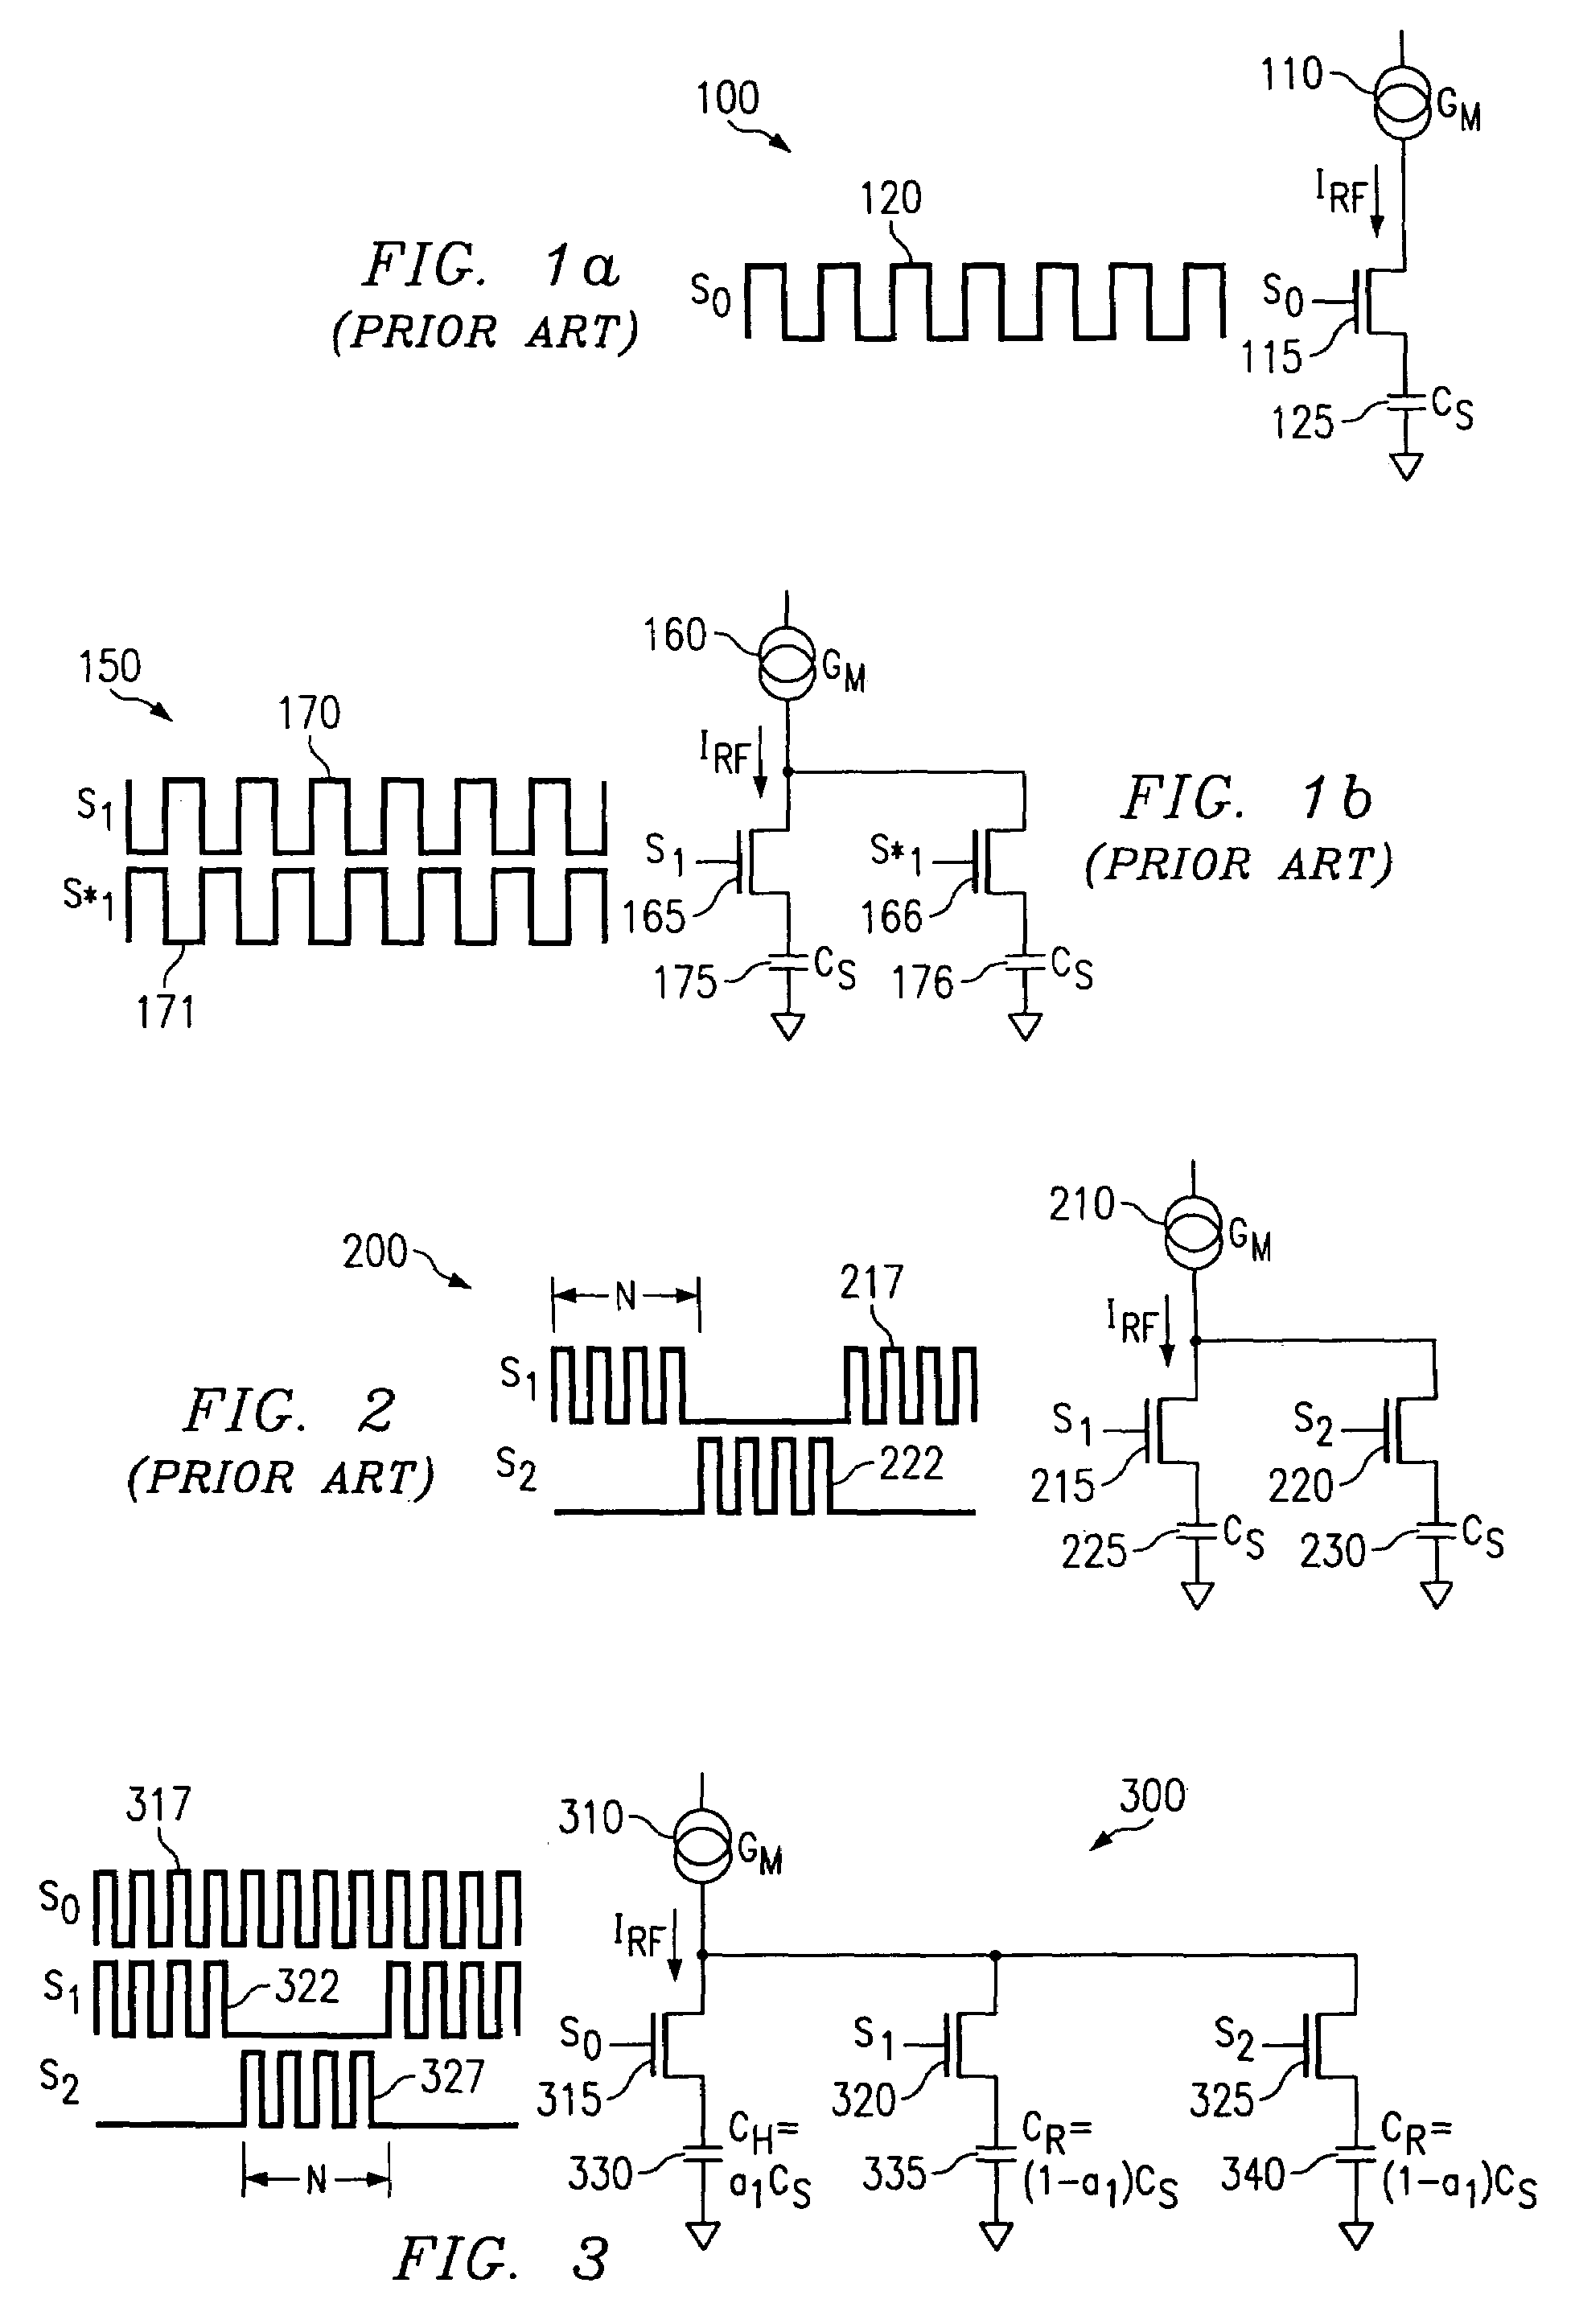 Efficient charge transfer using a switched capacitor resistor